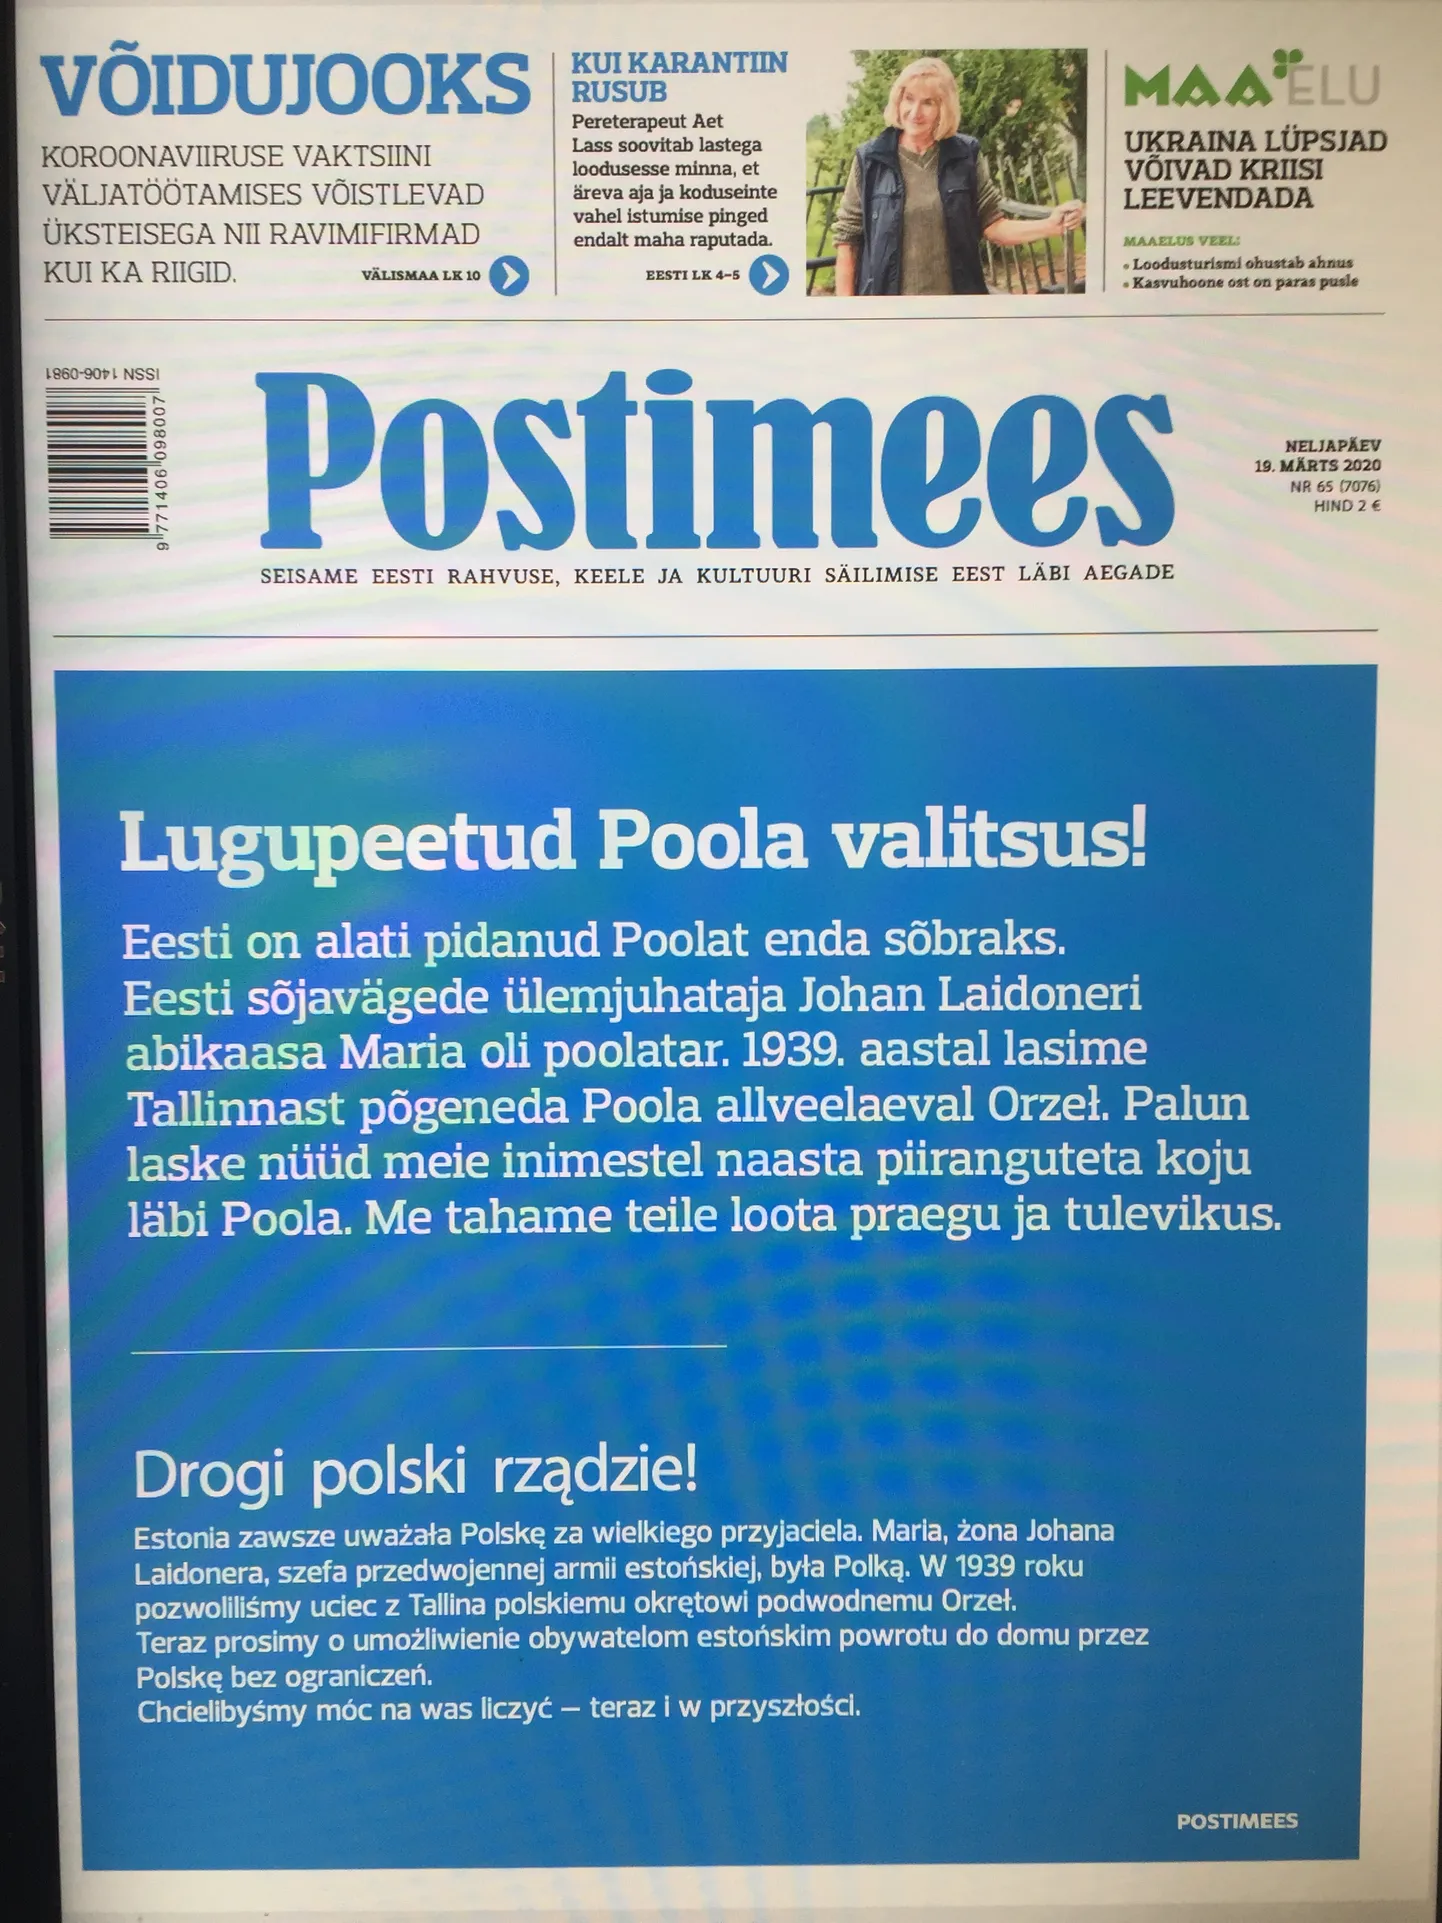 Front page of the Thursday edition of Postimees